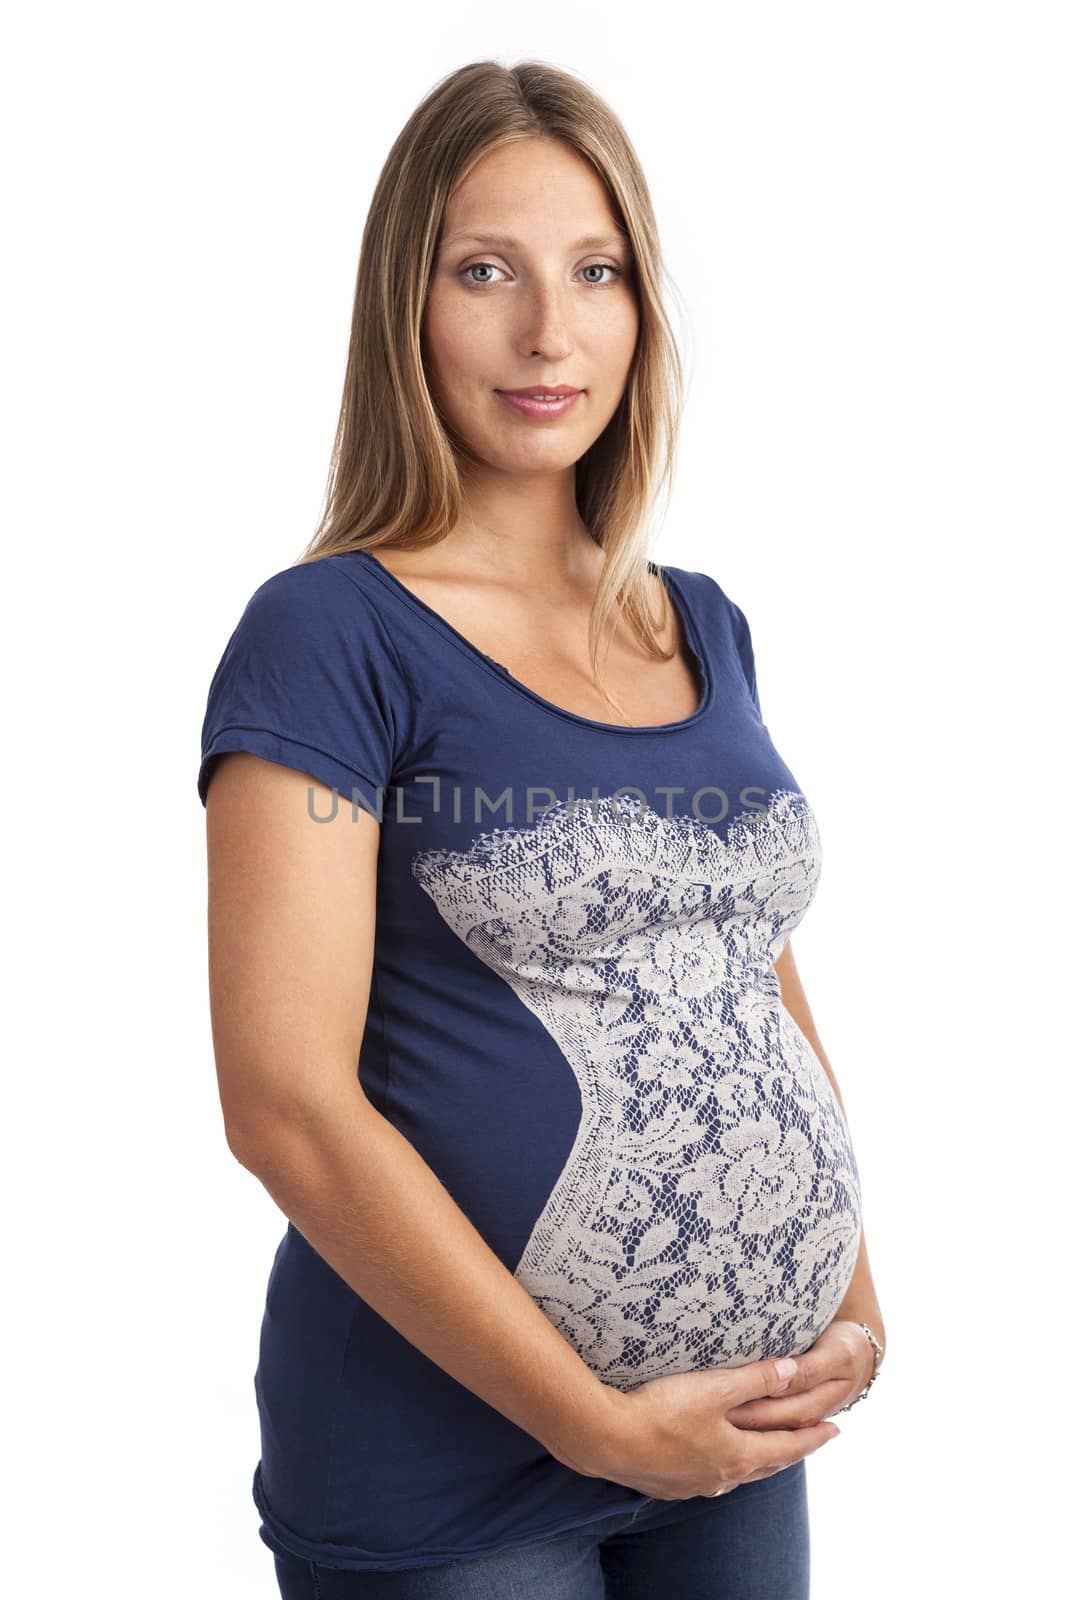 Young pregnant woman over white by photobac